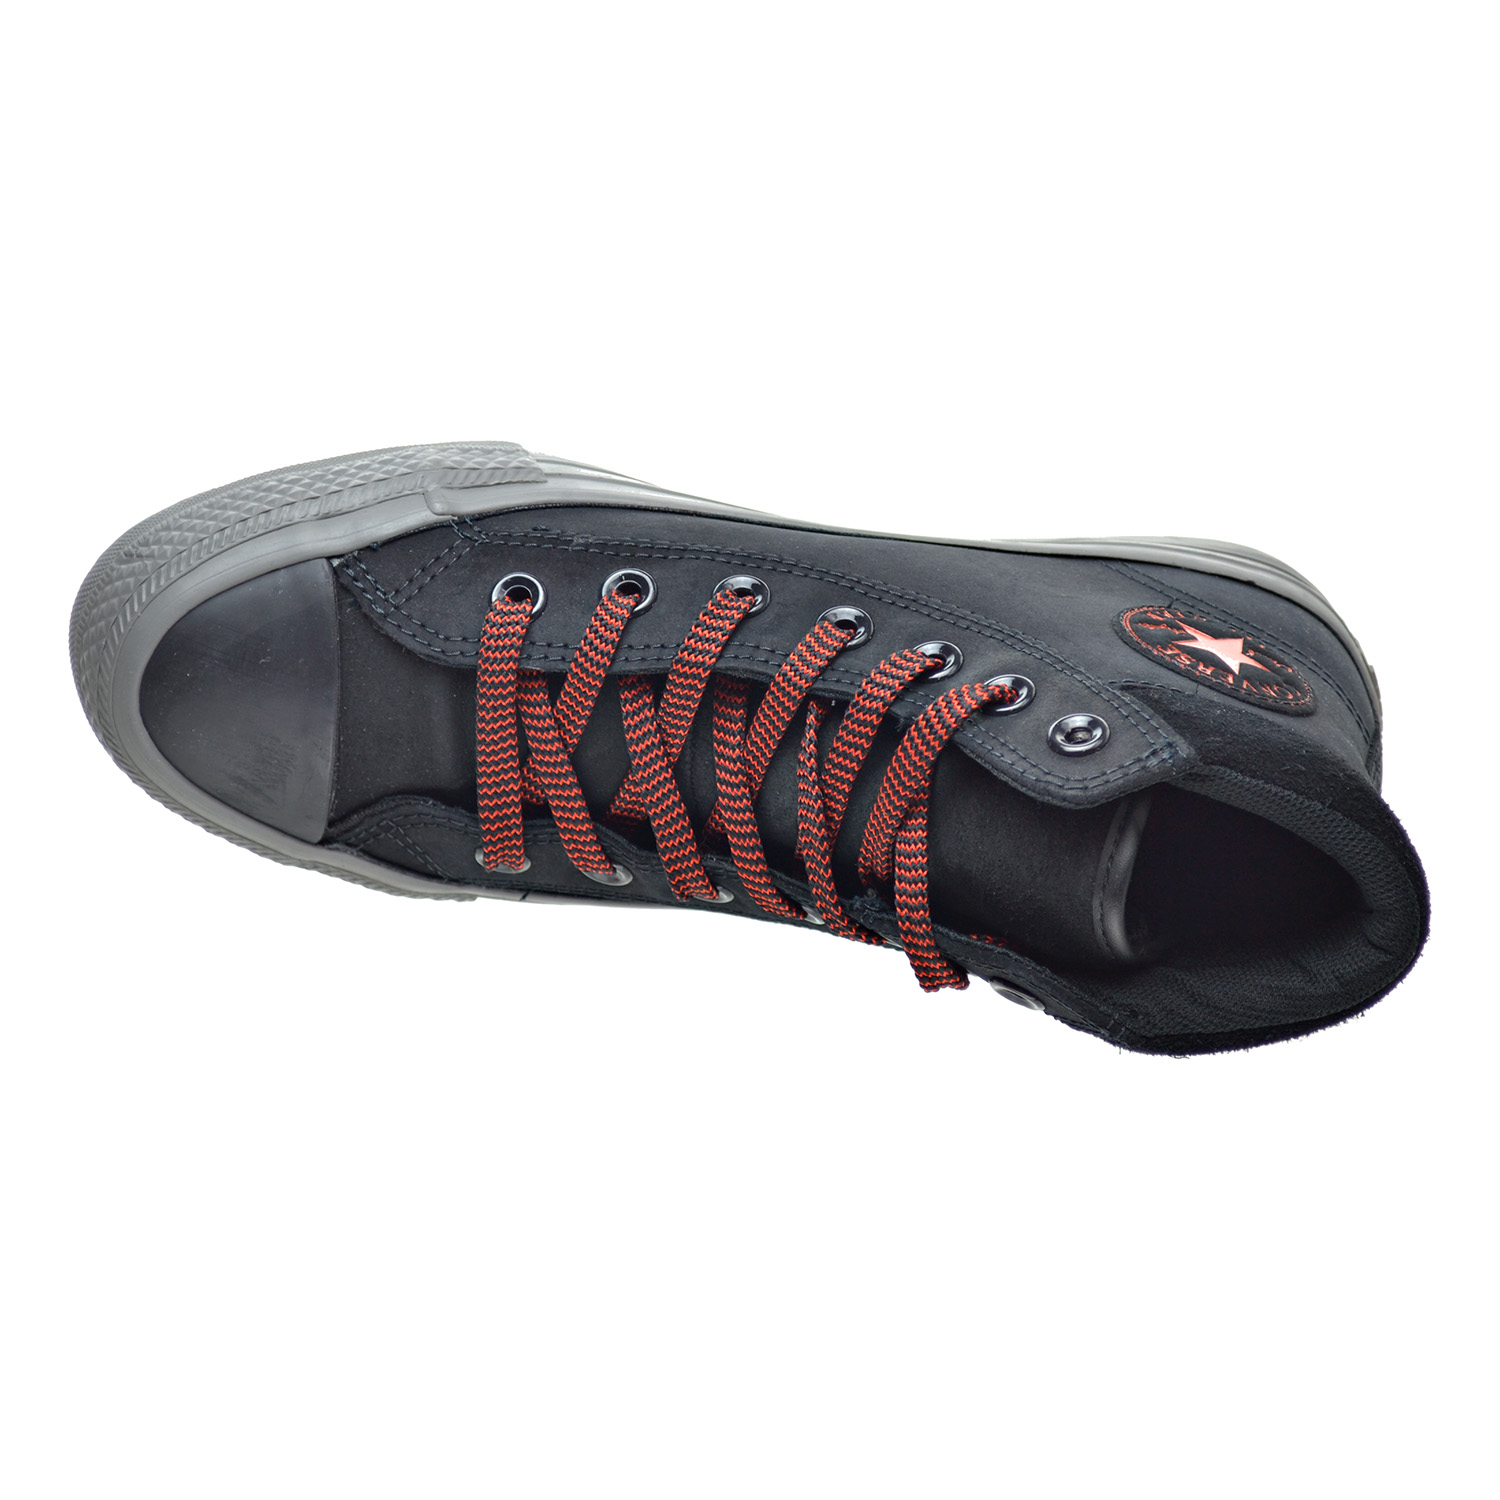 Converse Chuck Taylor All Star PC High Top Unisex Boots Black/Charcoal Grey/Signal Red 153672c - image 5 of 6